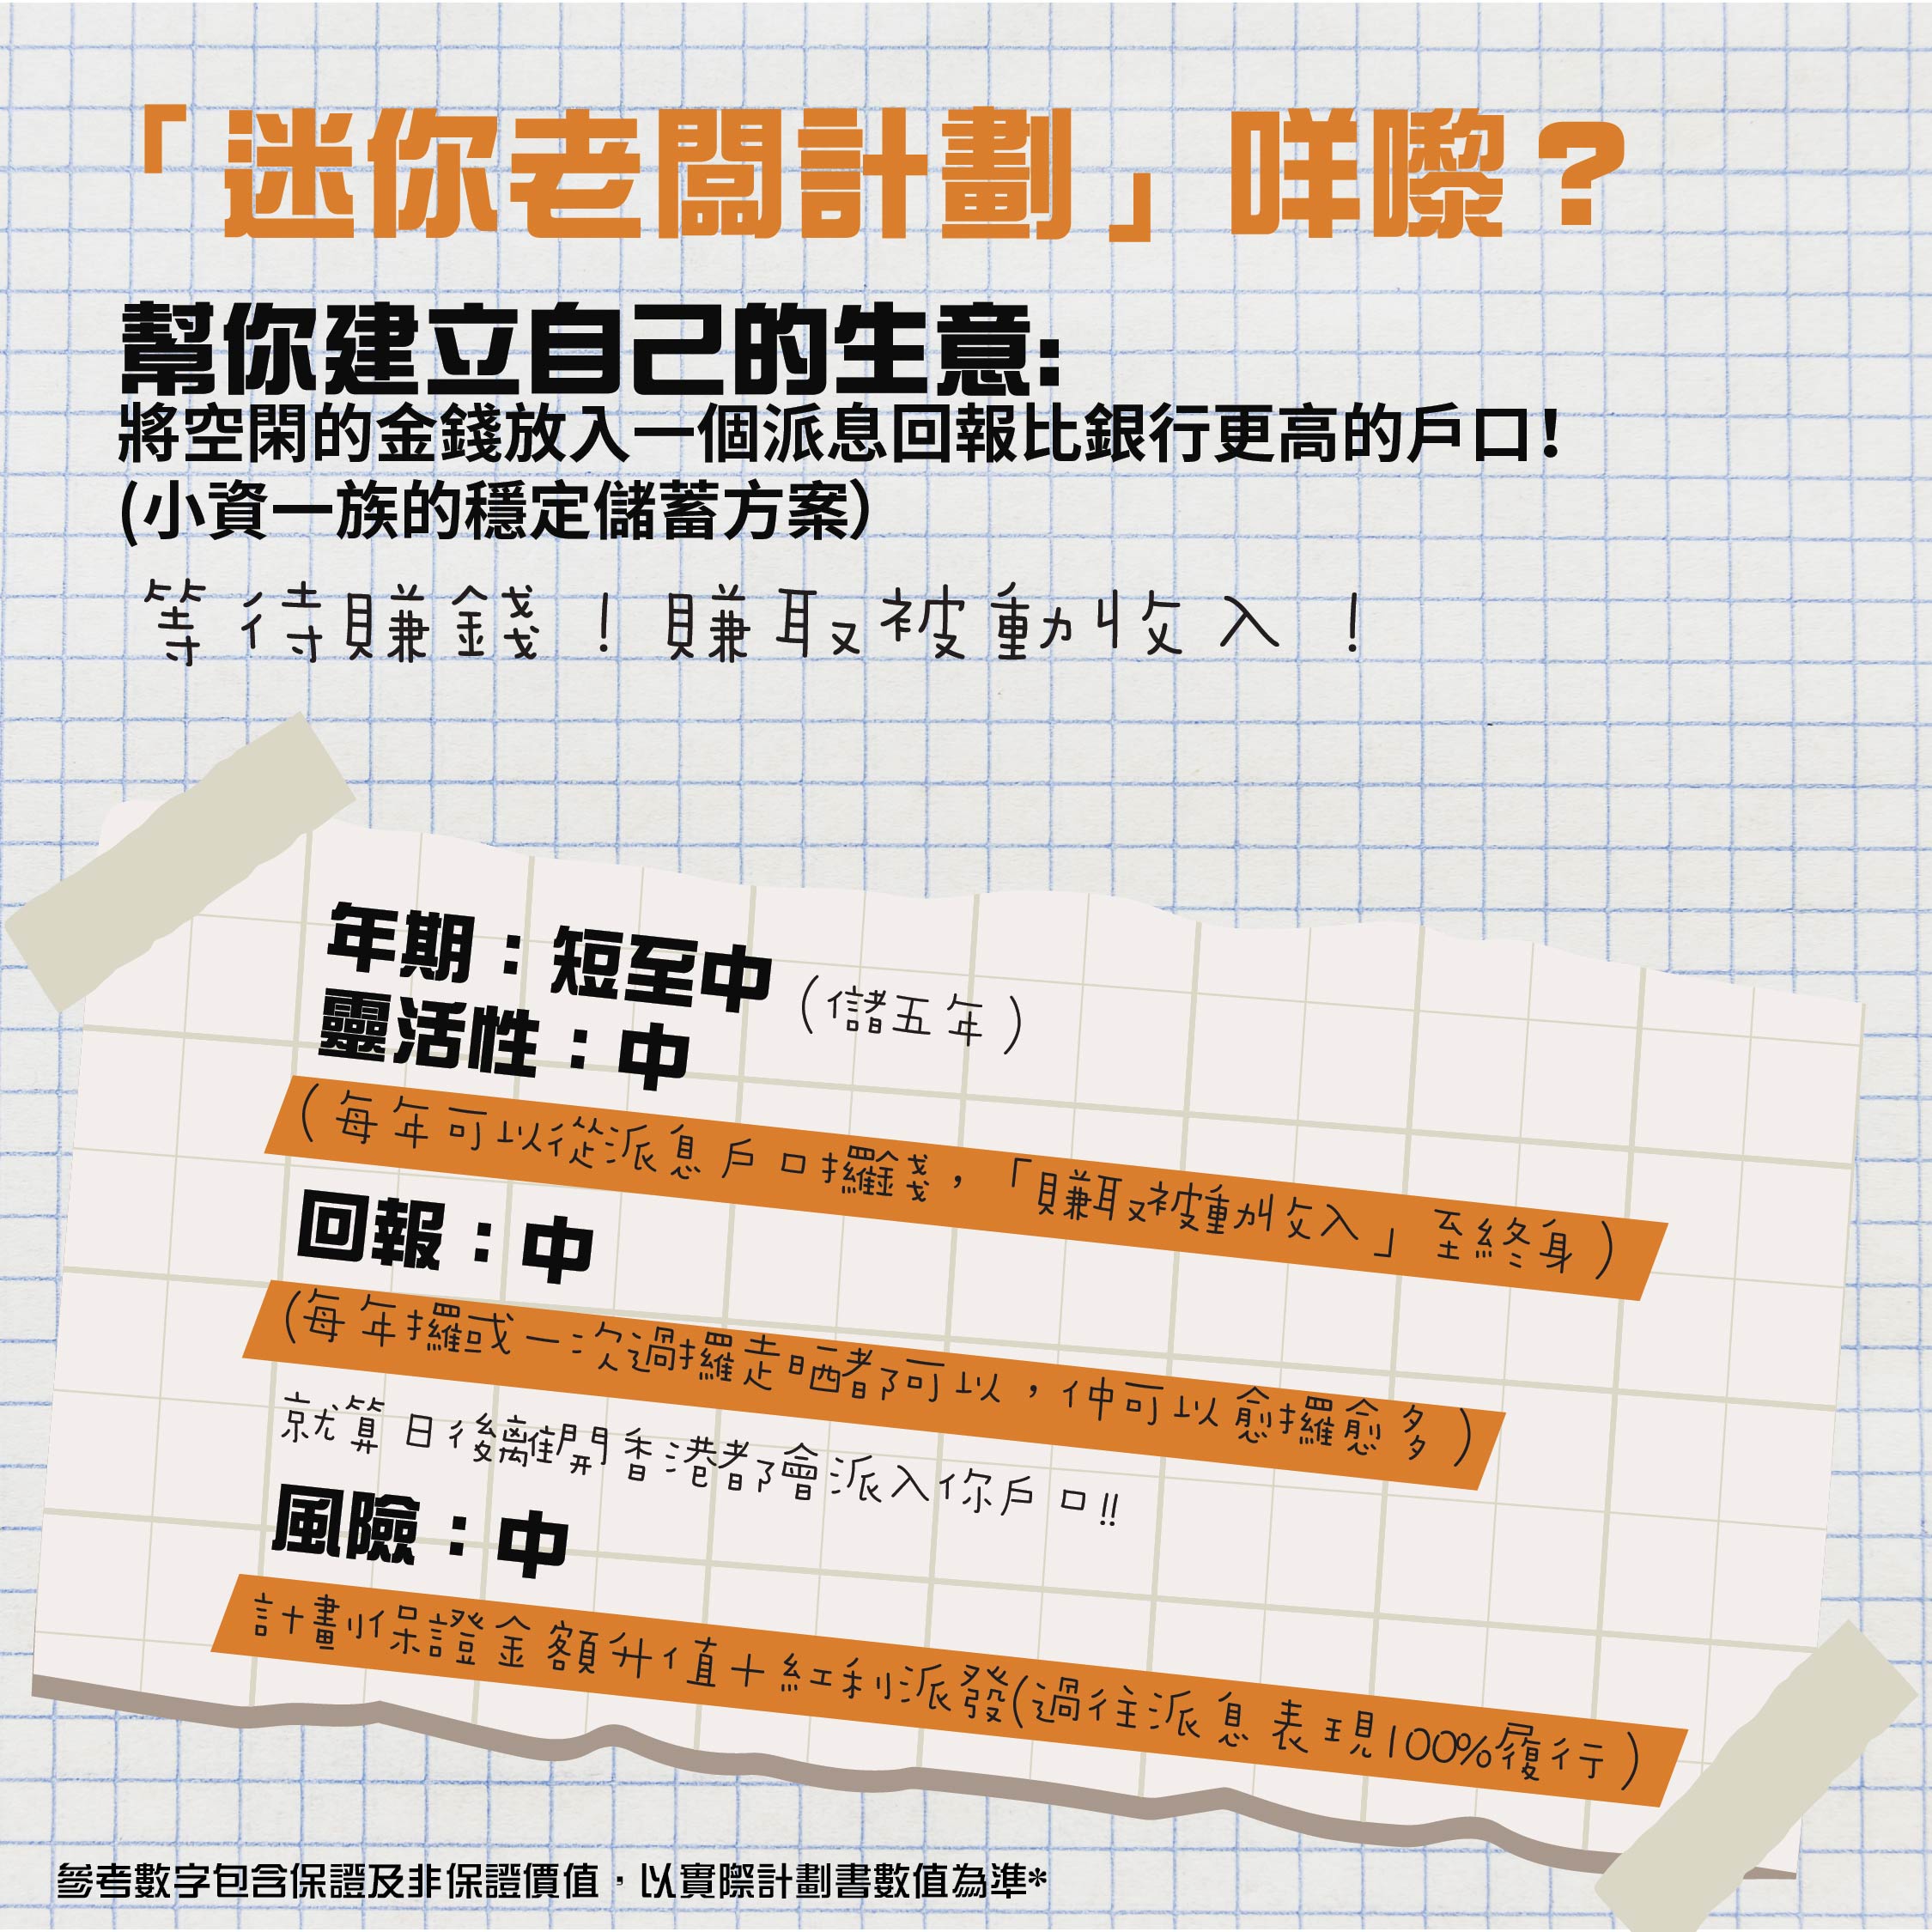 Fa Shu's "Mini Boss" Program丨Earn "Permanent Passive Income"丨More than 1,000 people have applied to join